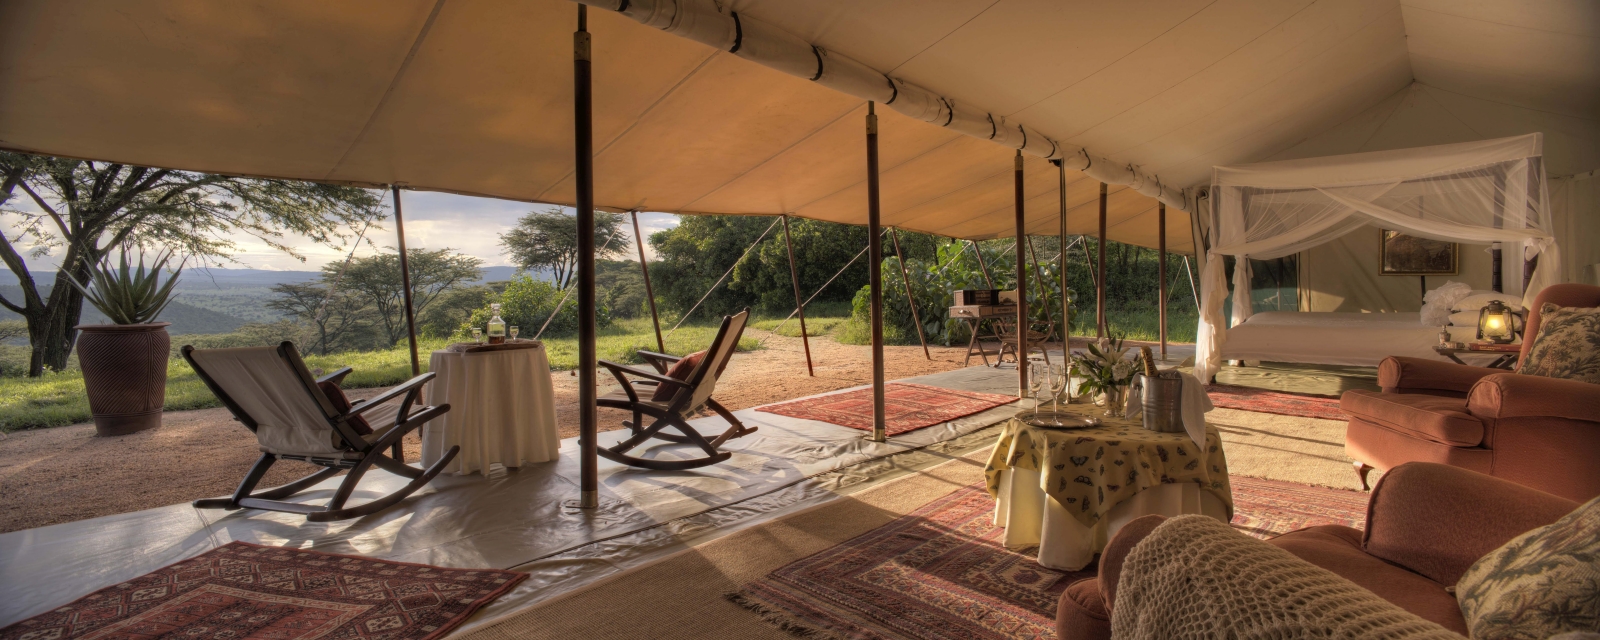 Honeymoon tent with four-poster bed, seating area and private terrace at luxury safari lodge Cottar's 1920's Safari Camp in the Maasai Mara, Kenya